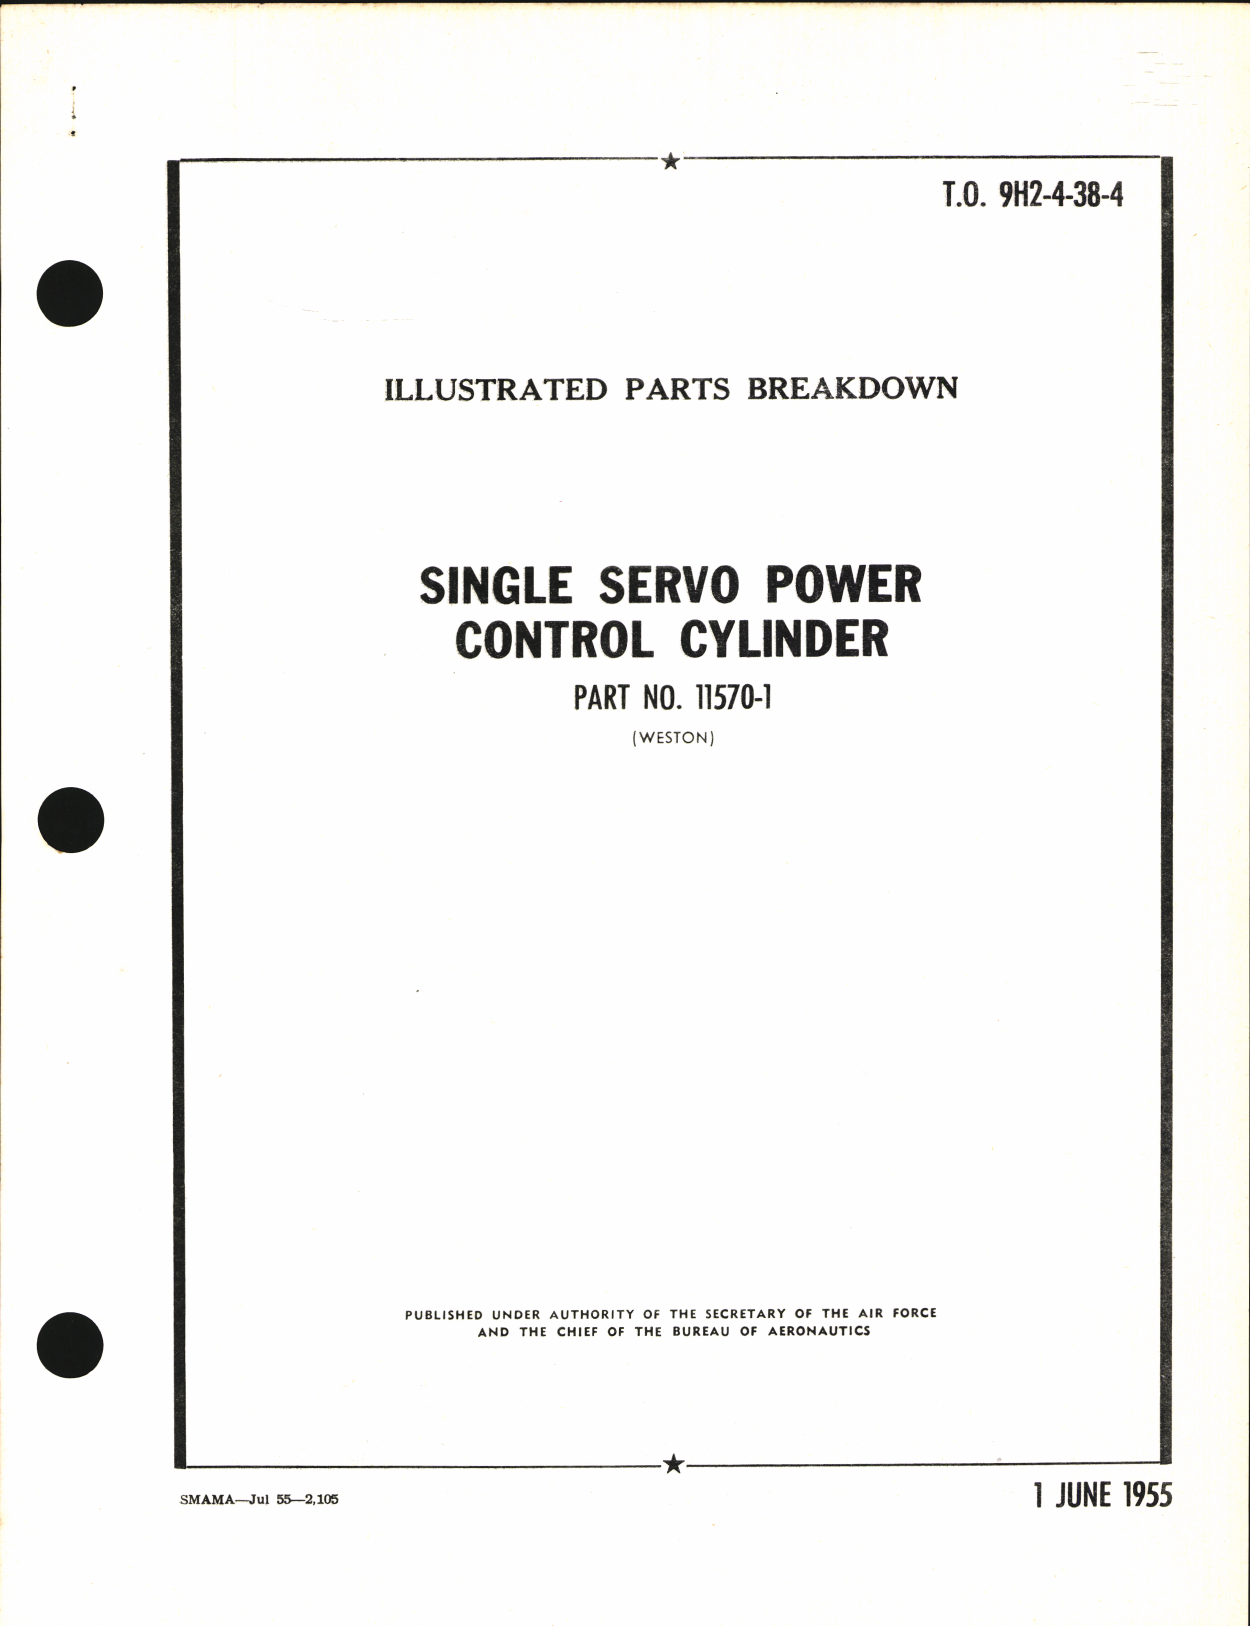 Sample page 1 from AirCorps Library document: Illustrated Parts Breakdown for Single Servo Power Control cylinder Part No. 11570-1